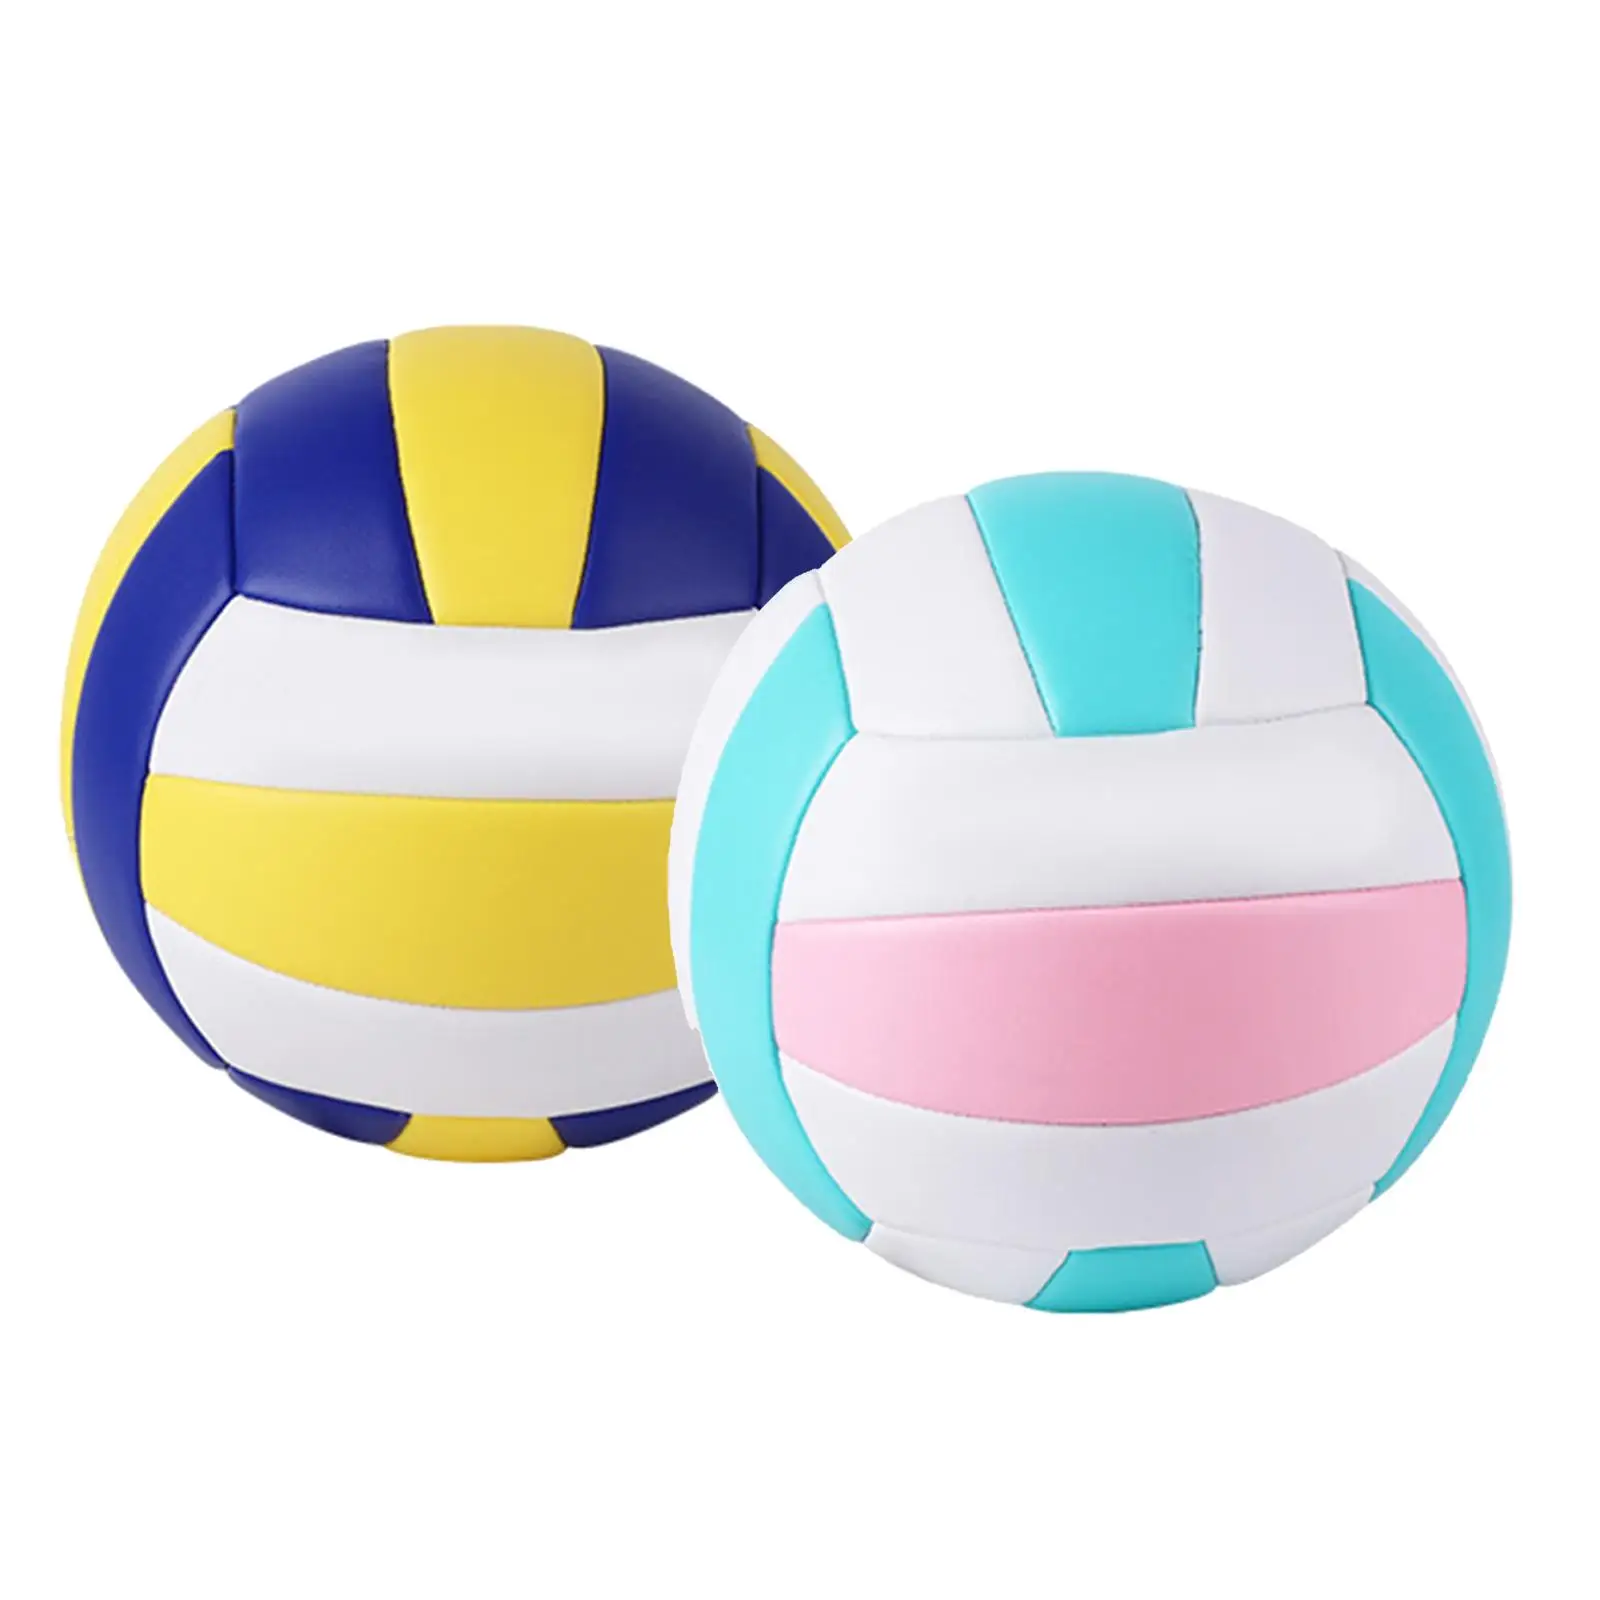 Standard Size 5 Indoor Volleyball PU Leather Leisure Ball with Inflator Pool  Game for Kids